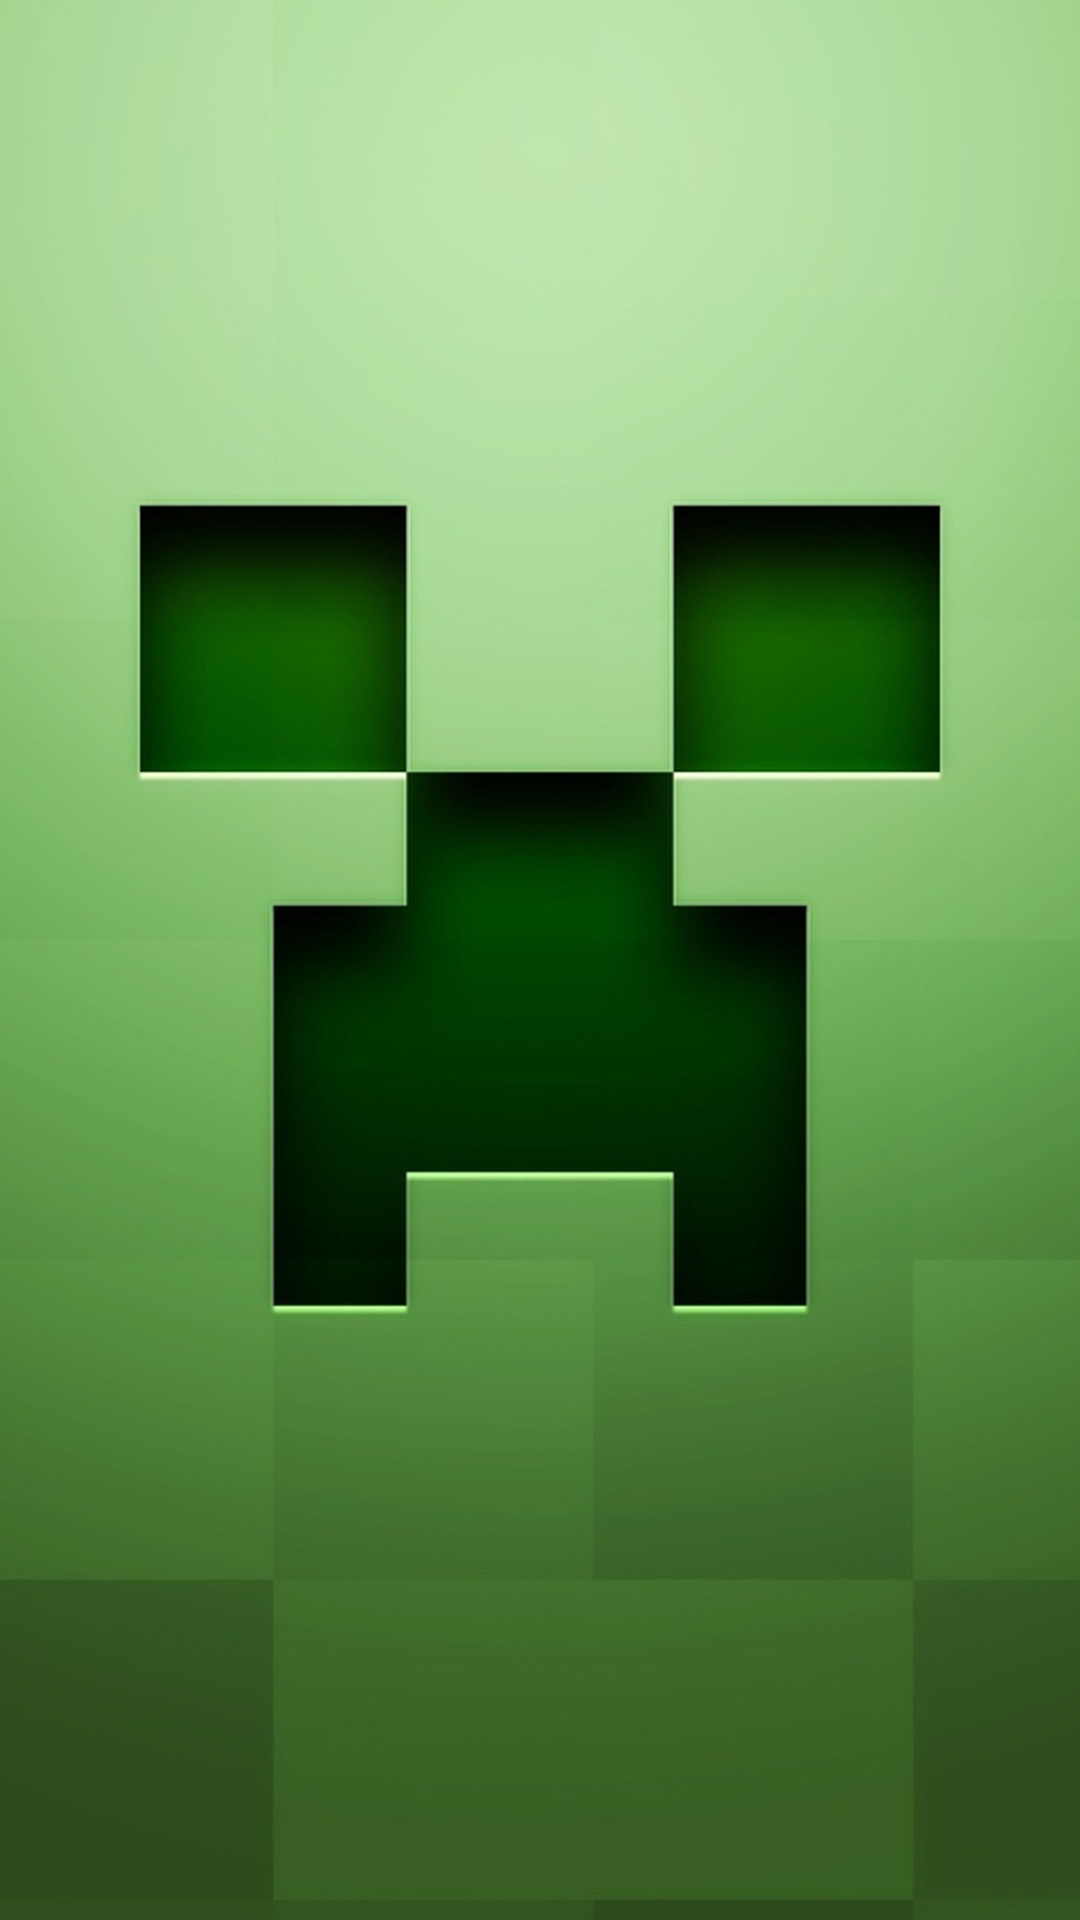 minecraft 1.7.1 free download for android